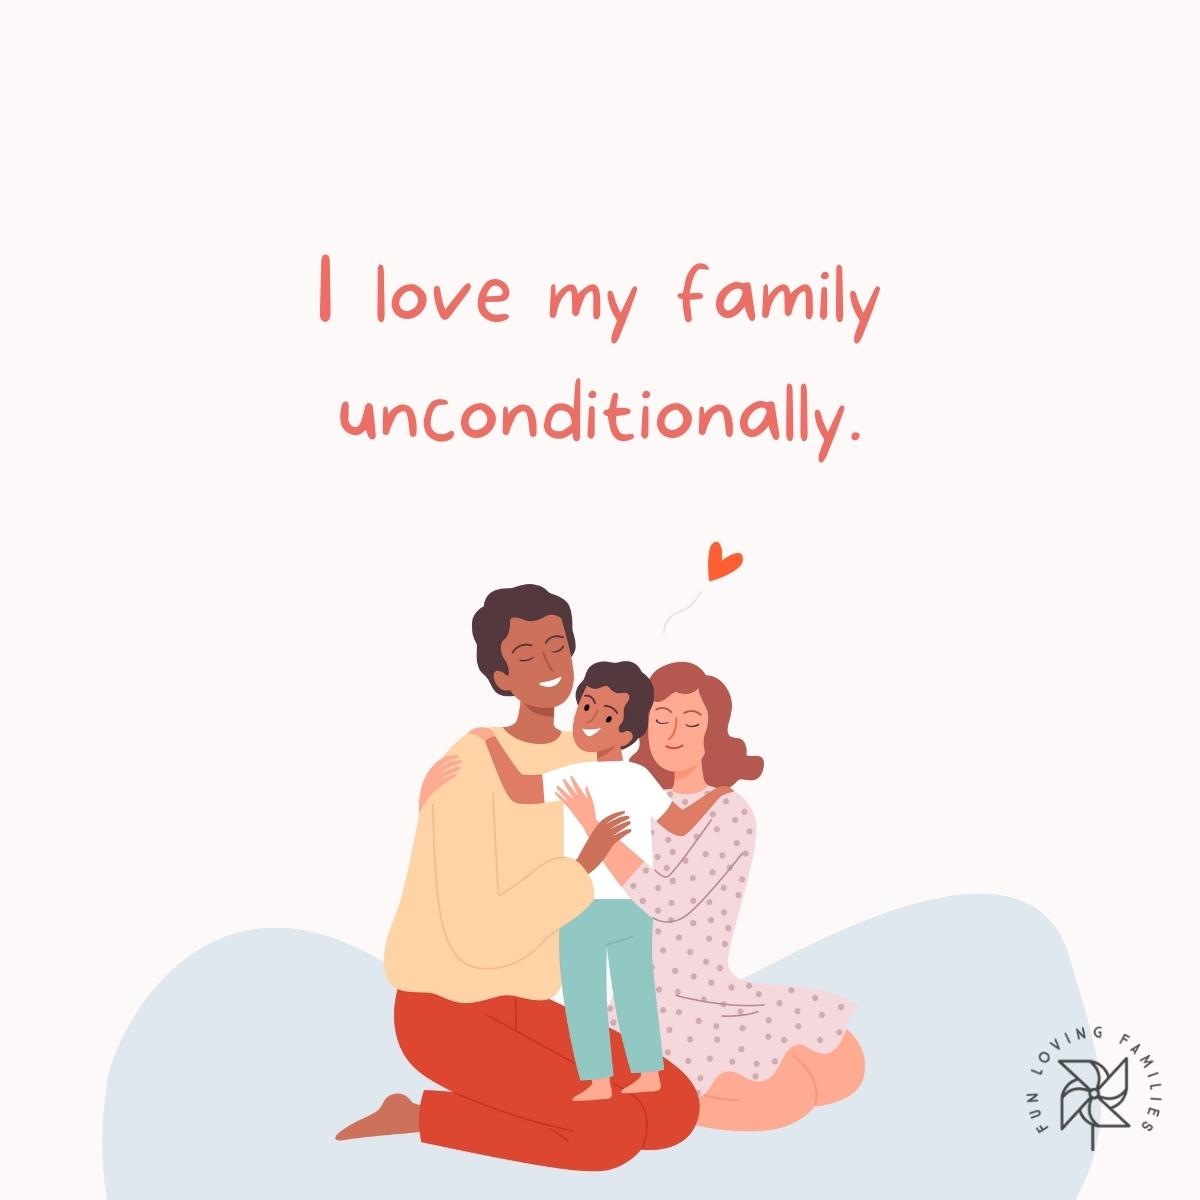 I love my family unconditionally affirmation